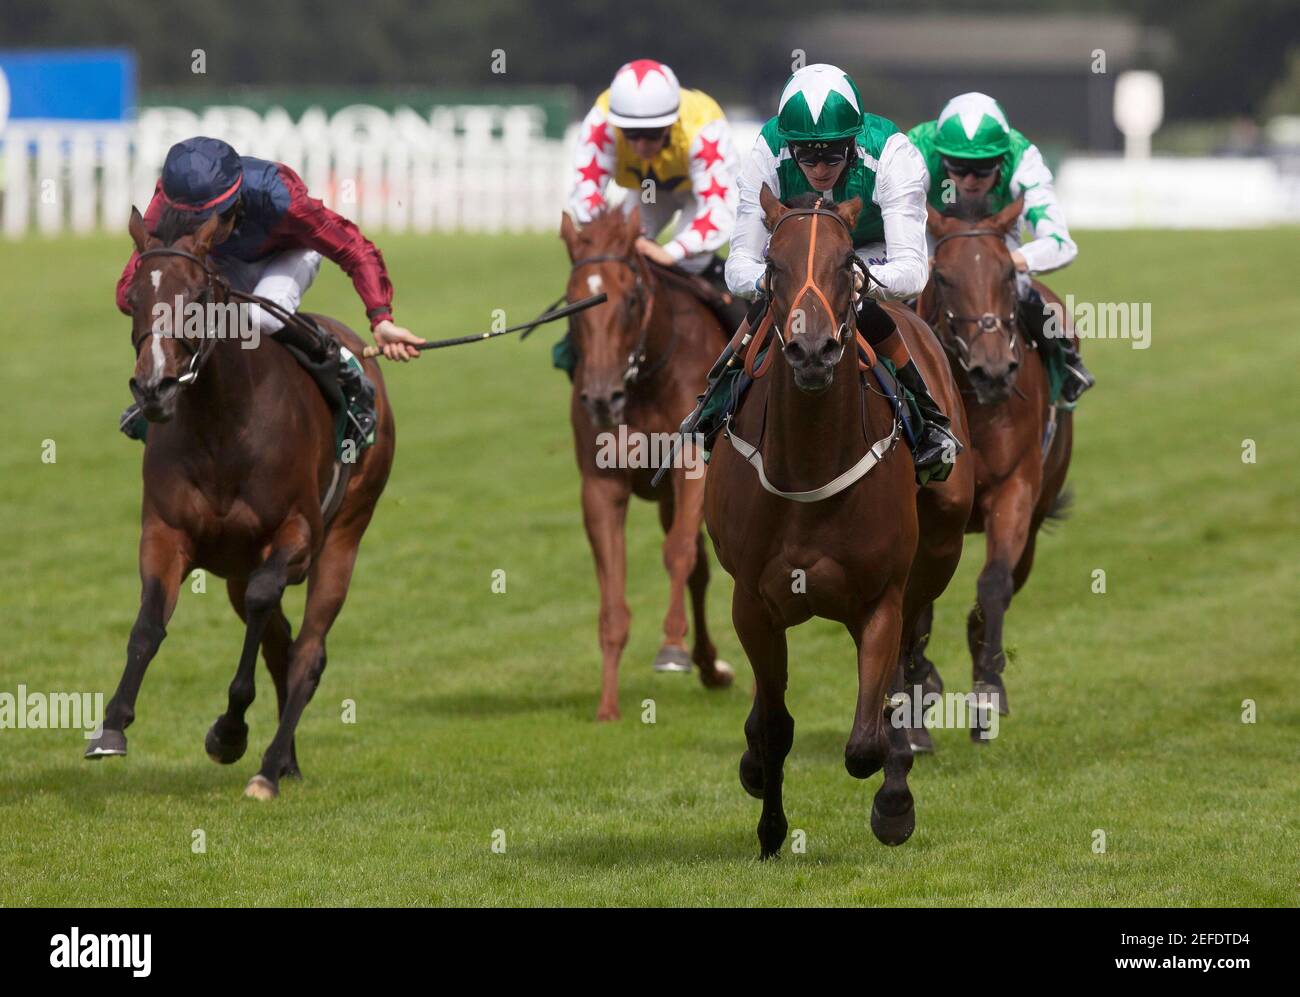 Horse Racing - Ascot - Ascot Racecourse - 28/7/12   Maureen ridden by Richard Hughes leads the field home to win the 15.25, The Princess Margaret Juddmonte Stakes Race  Mandatory Credit: Action Images / Julian Herbert  Livepic Stock Photo